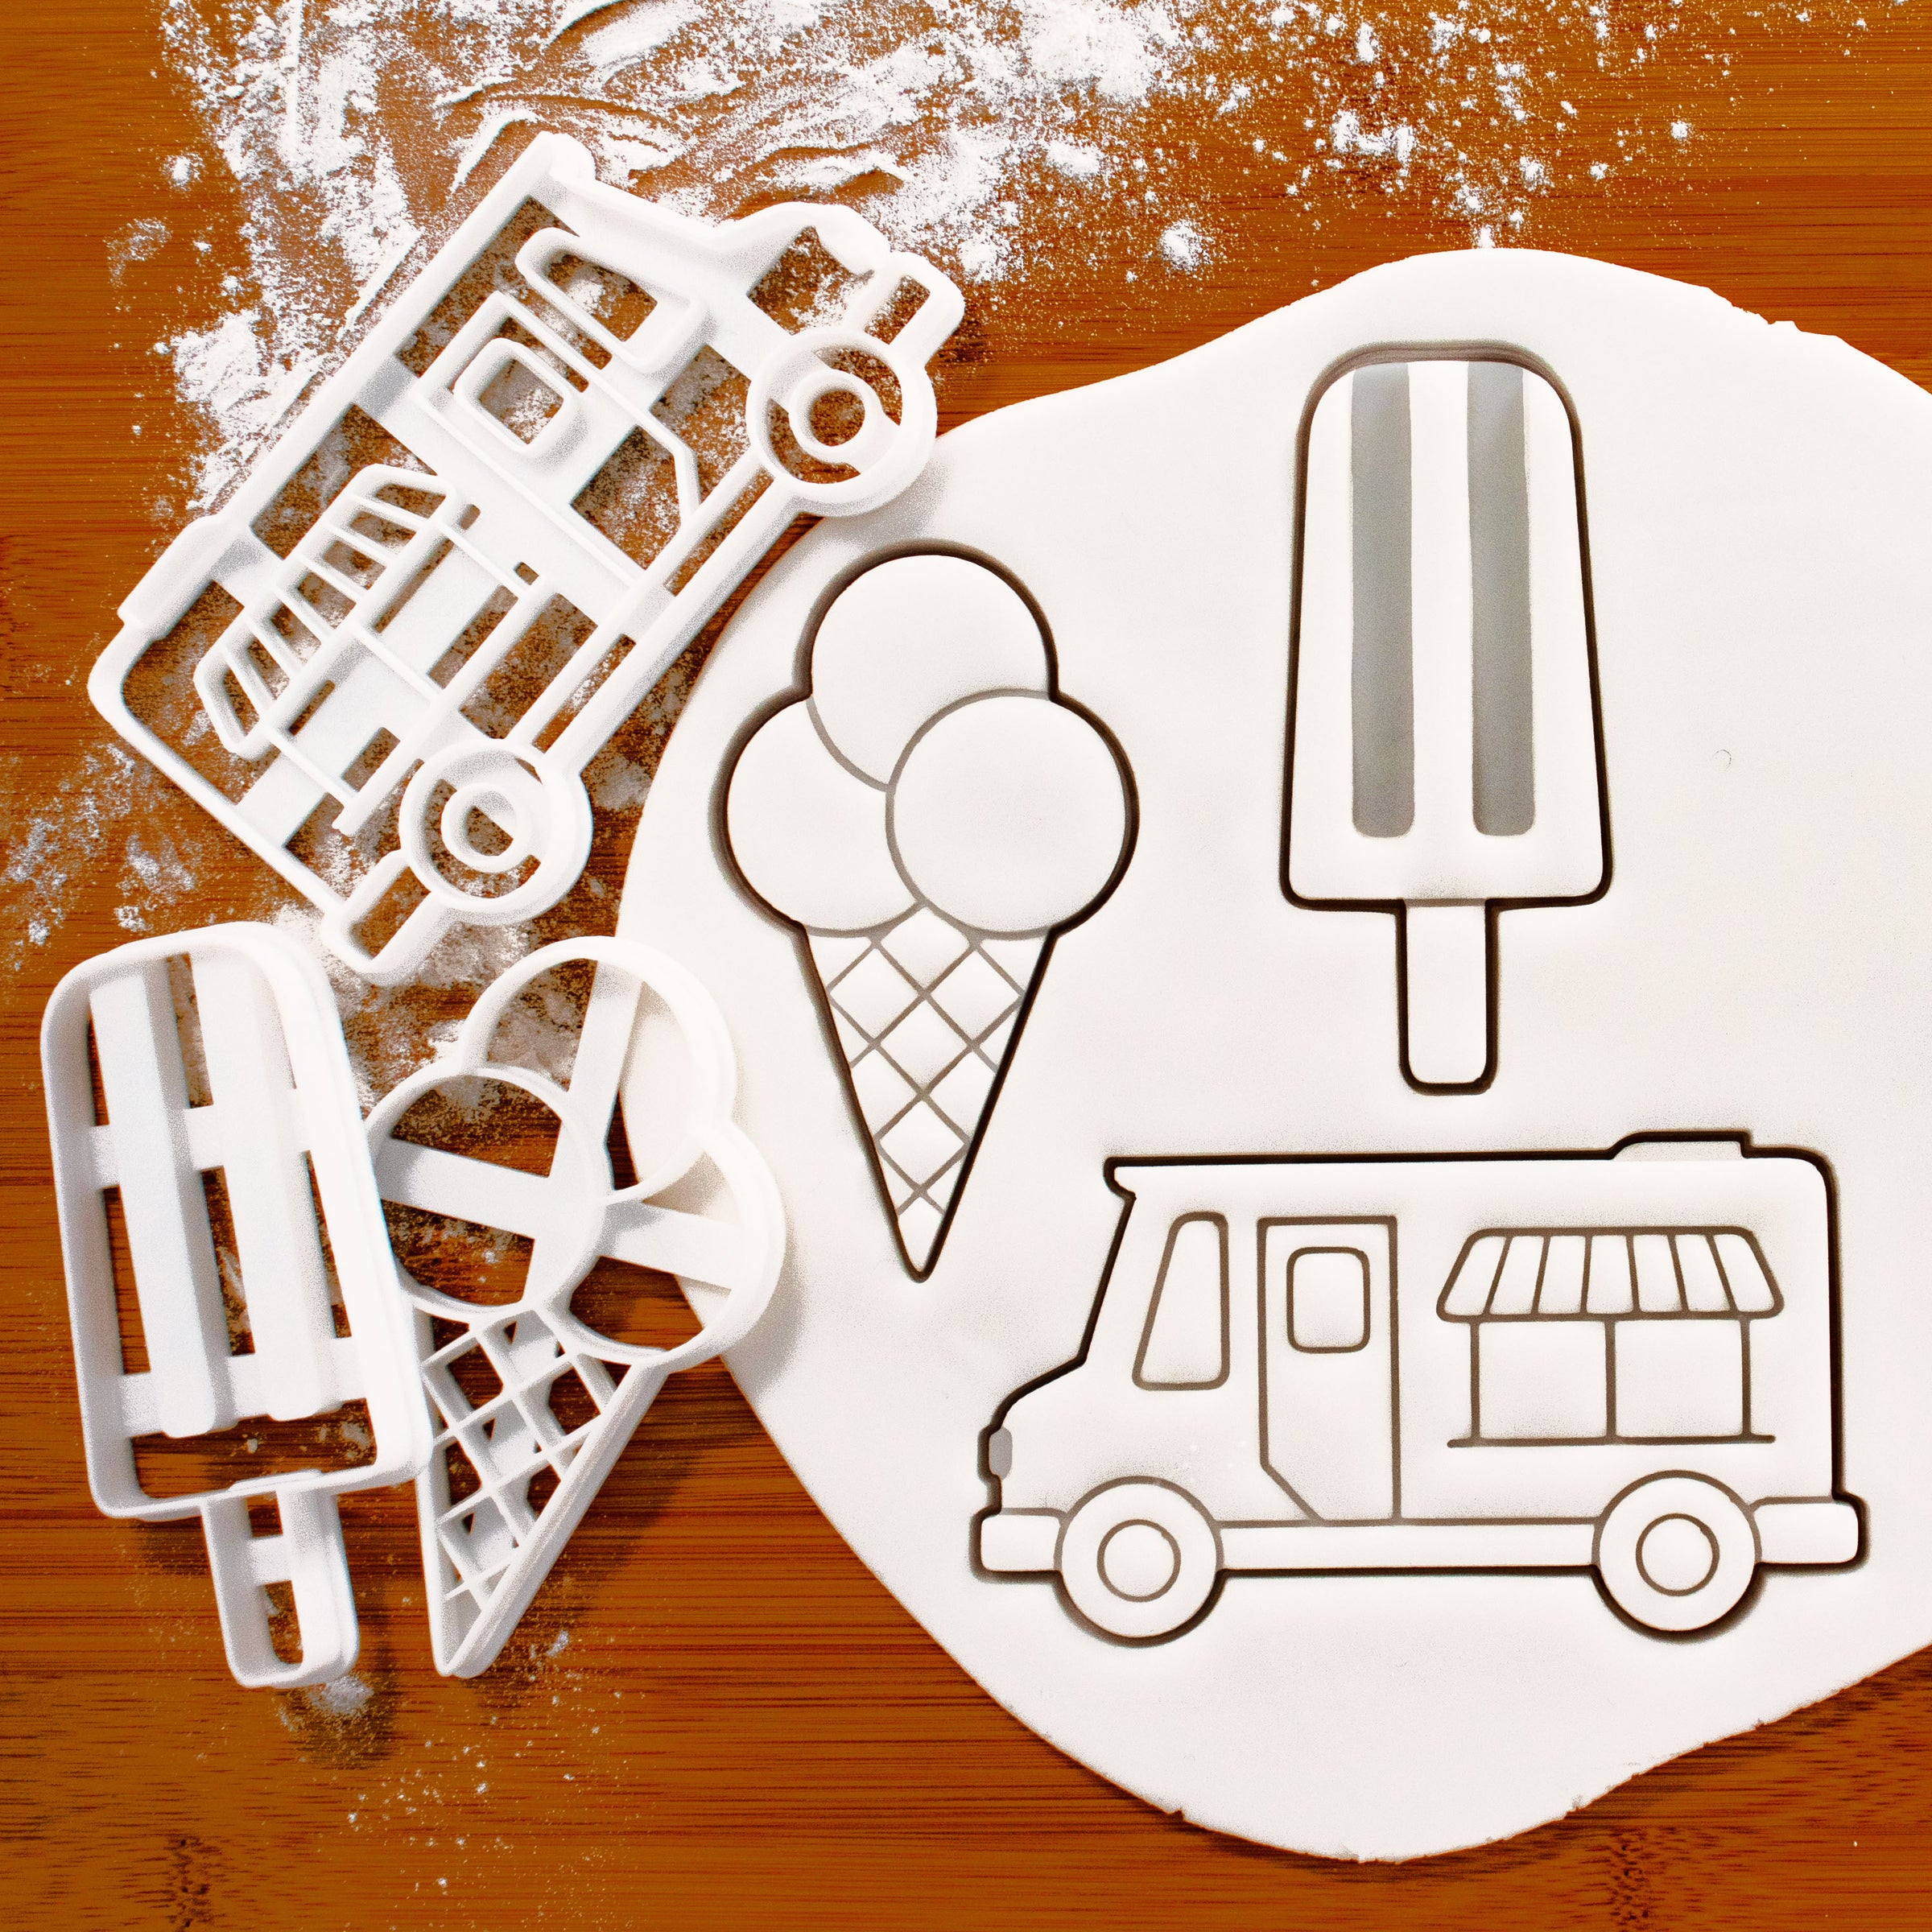 Ice Cream Cone, Ice Lolly and Ice Cream Truck Cookie Cutters